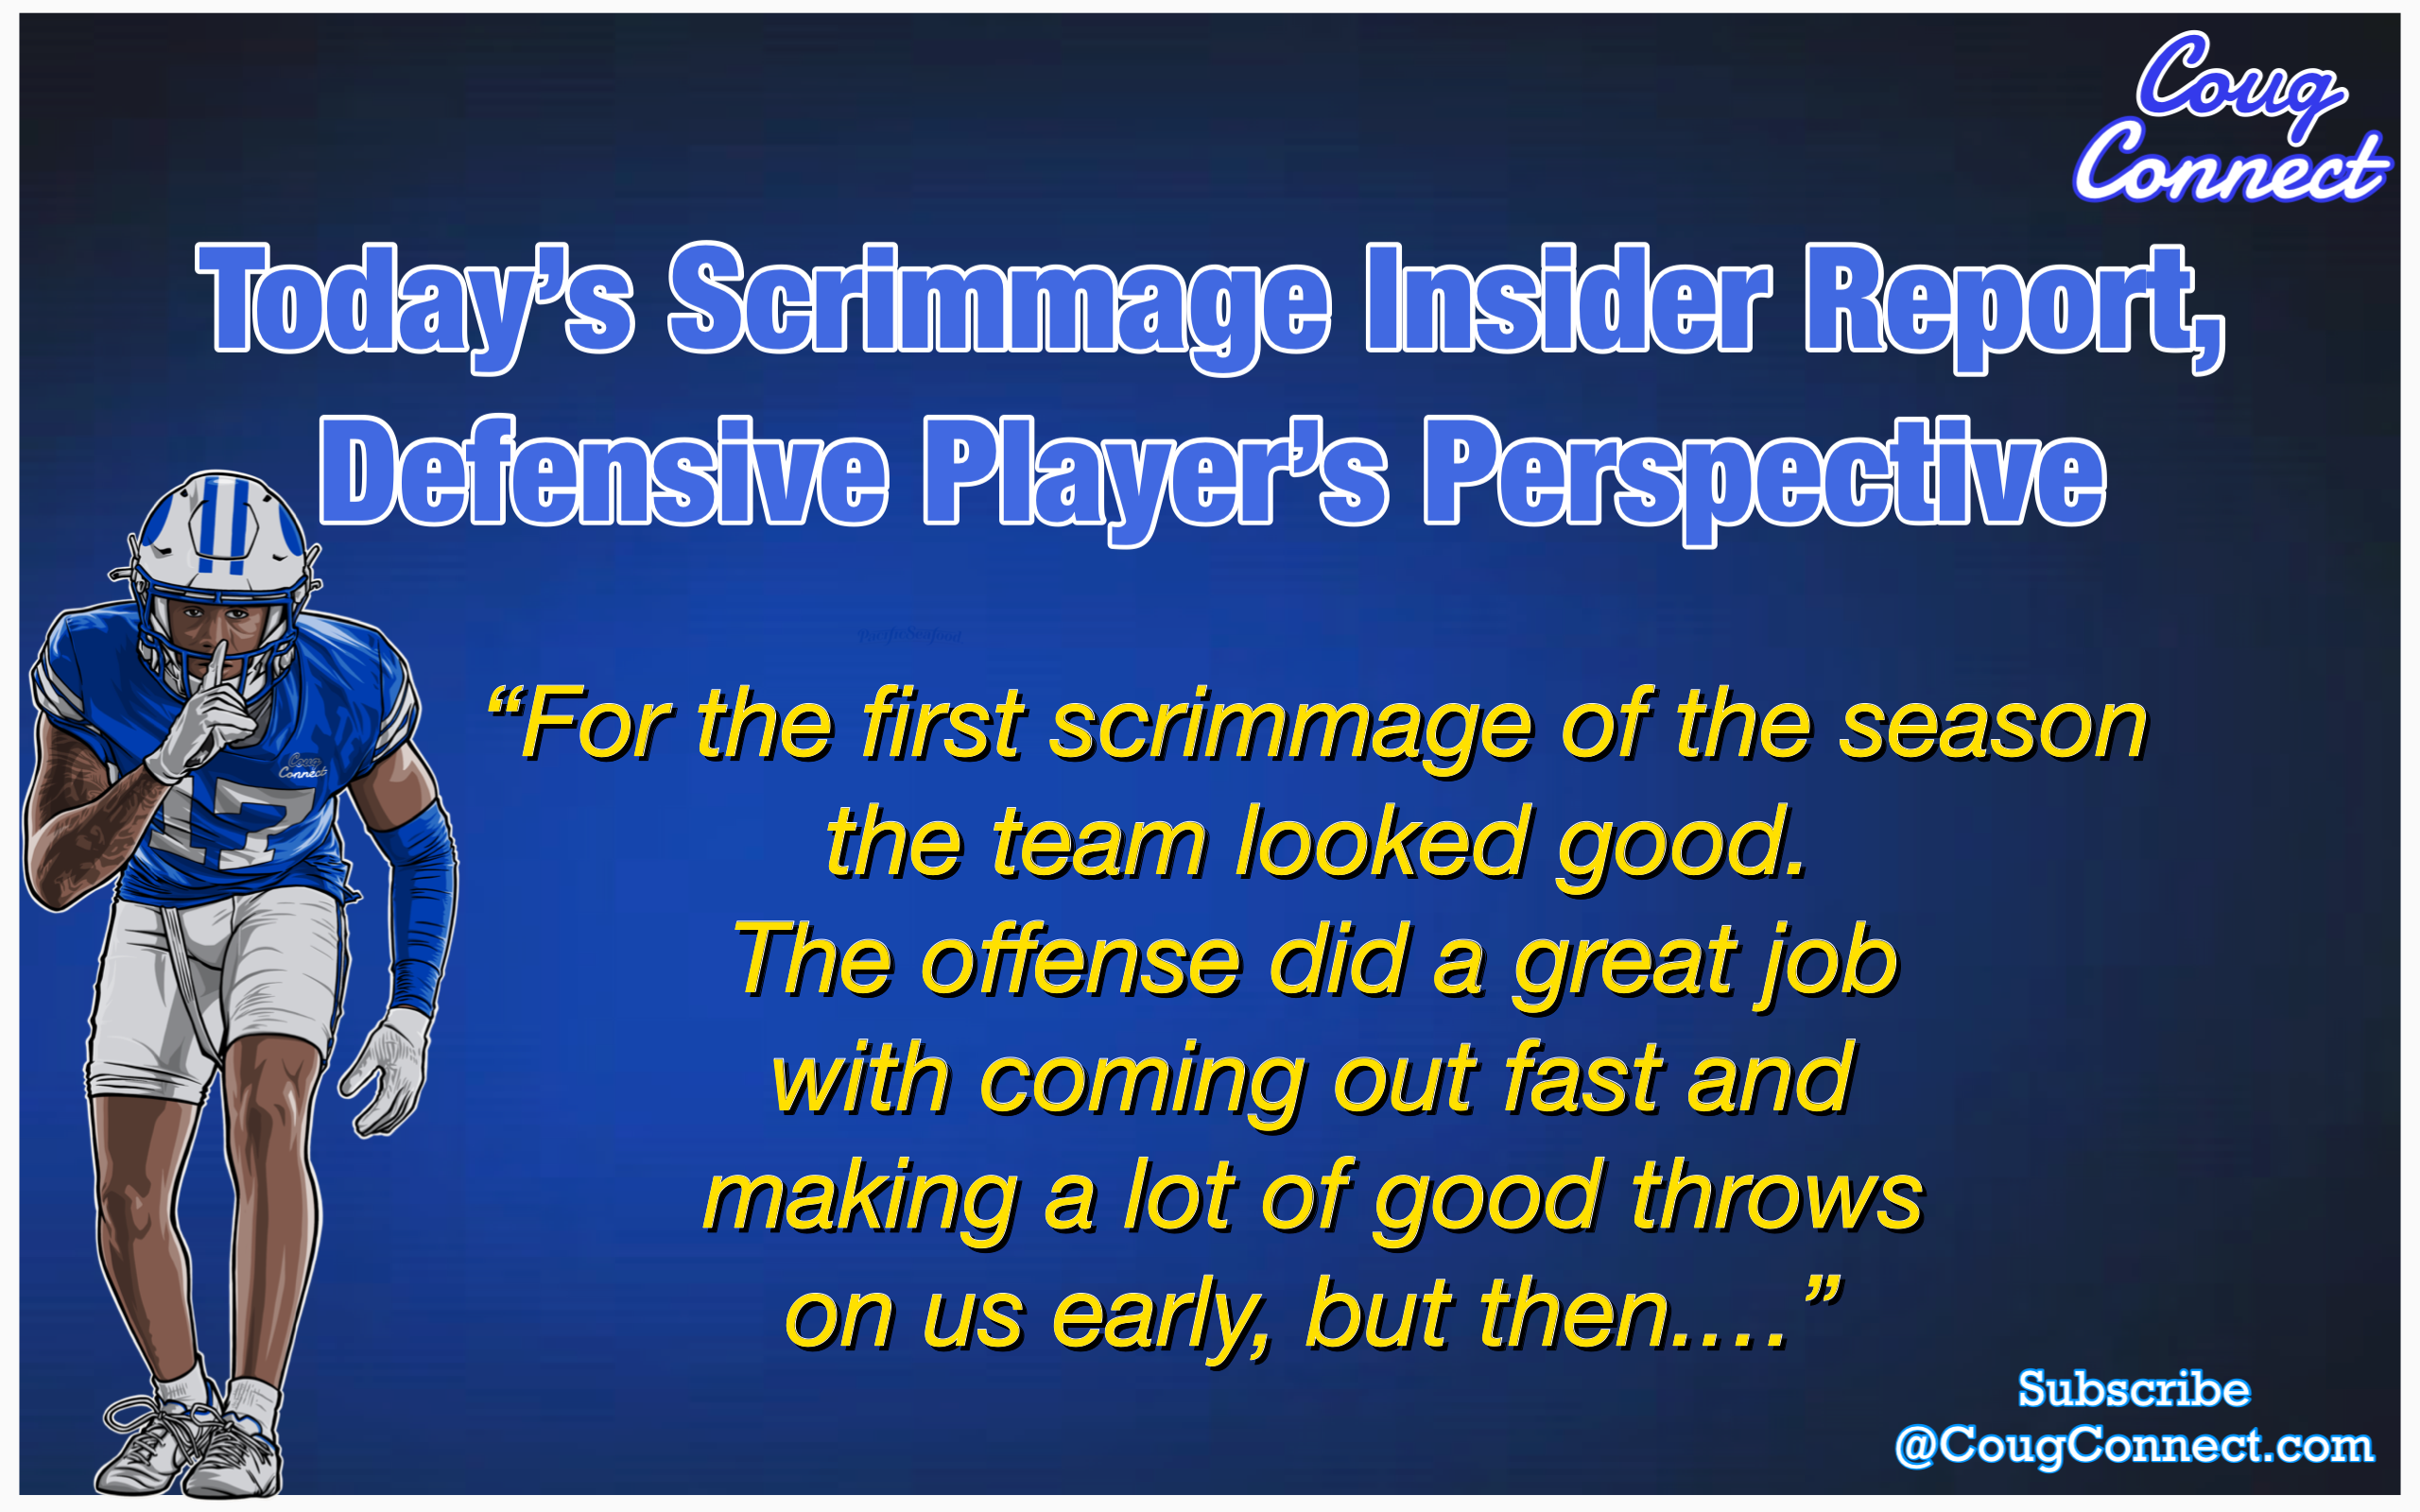 Today’s Scrimmage Insider Report, Defensive Player’s Perspective